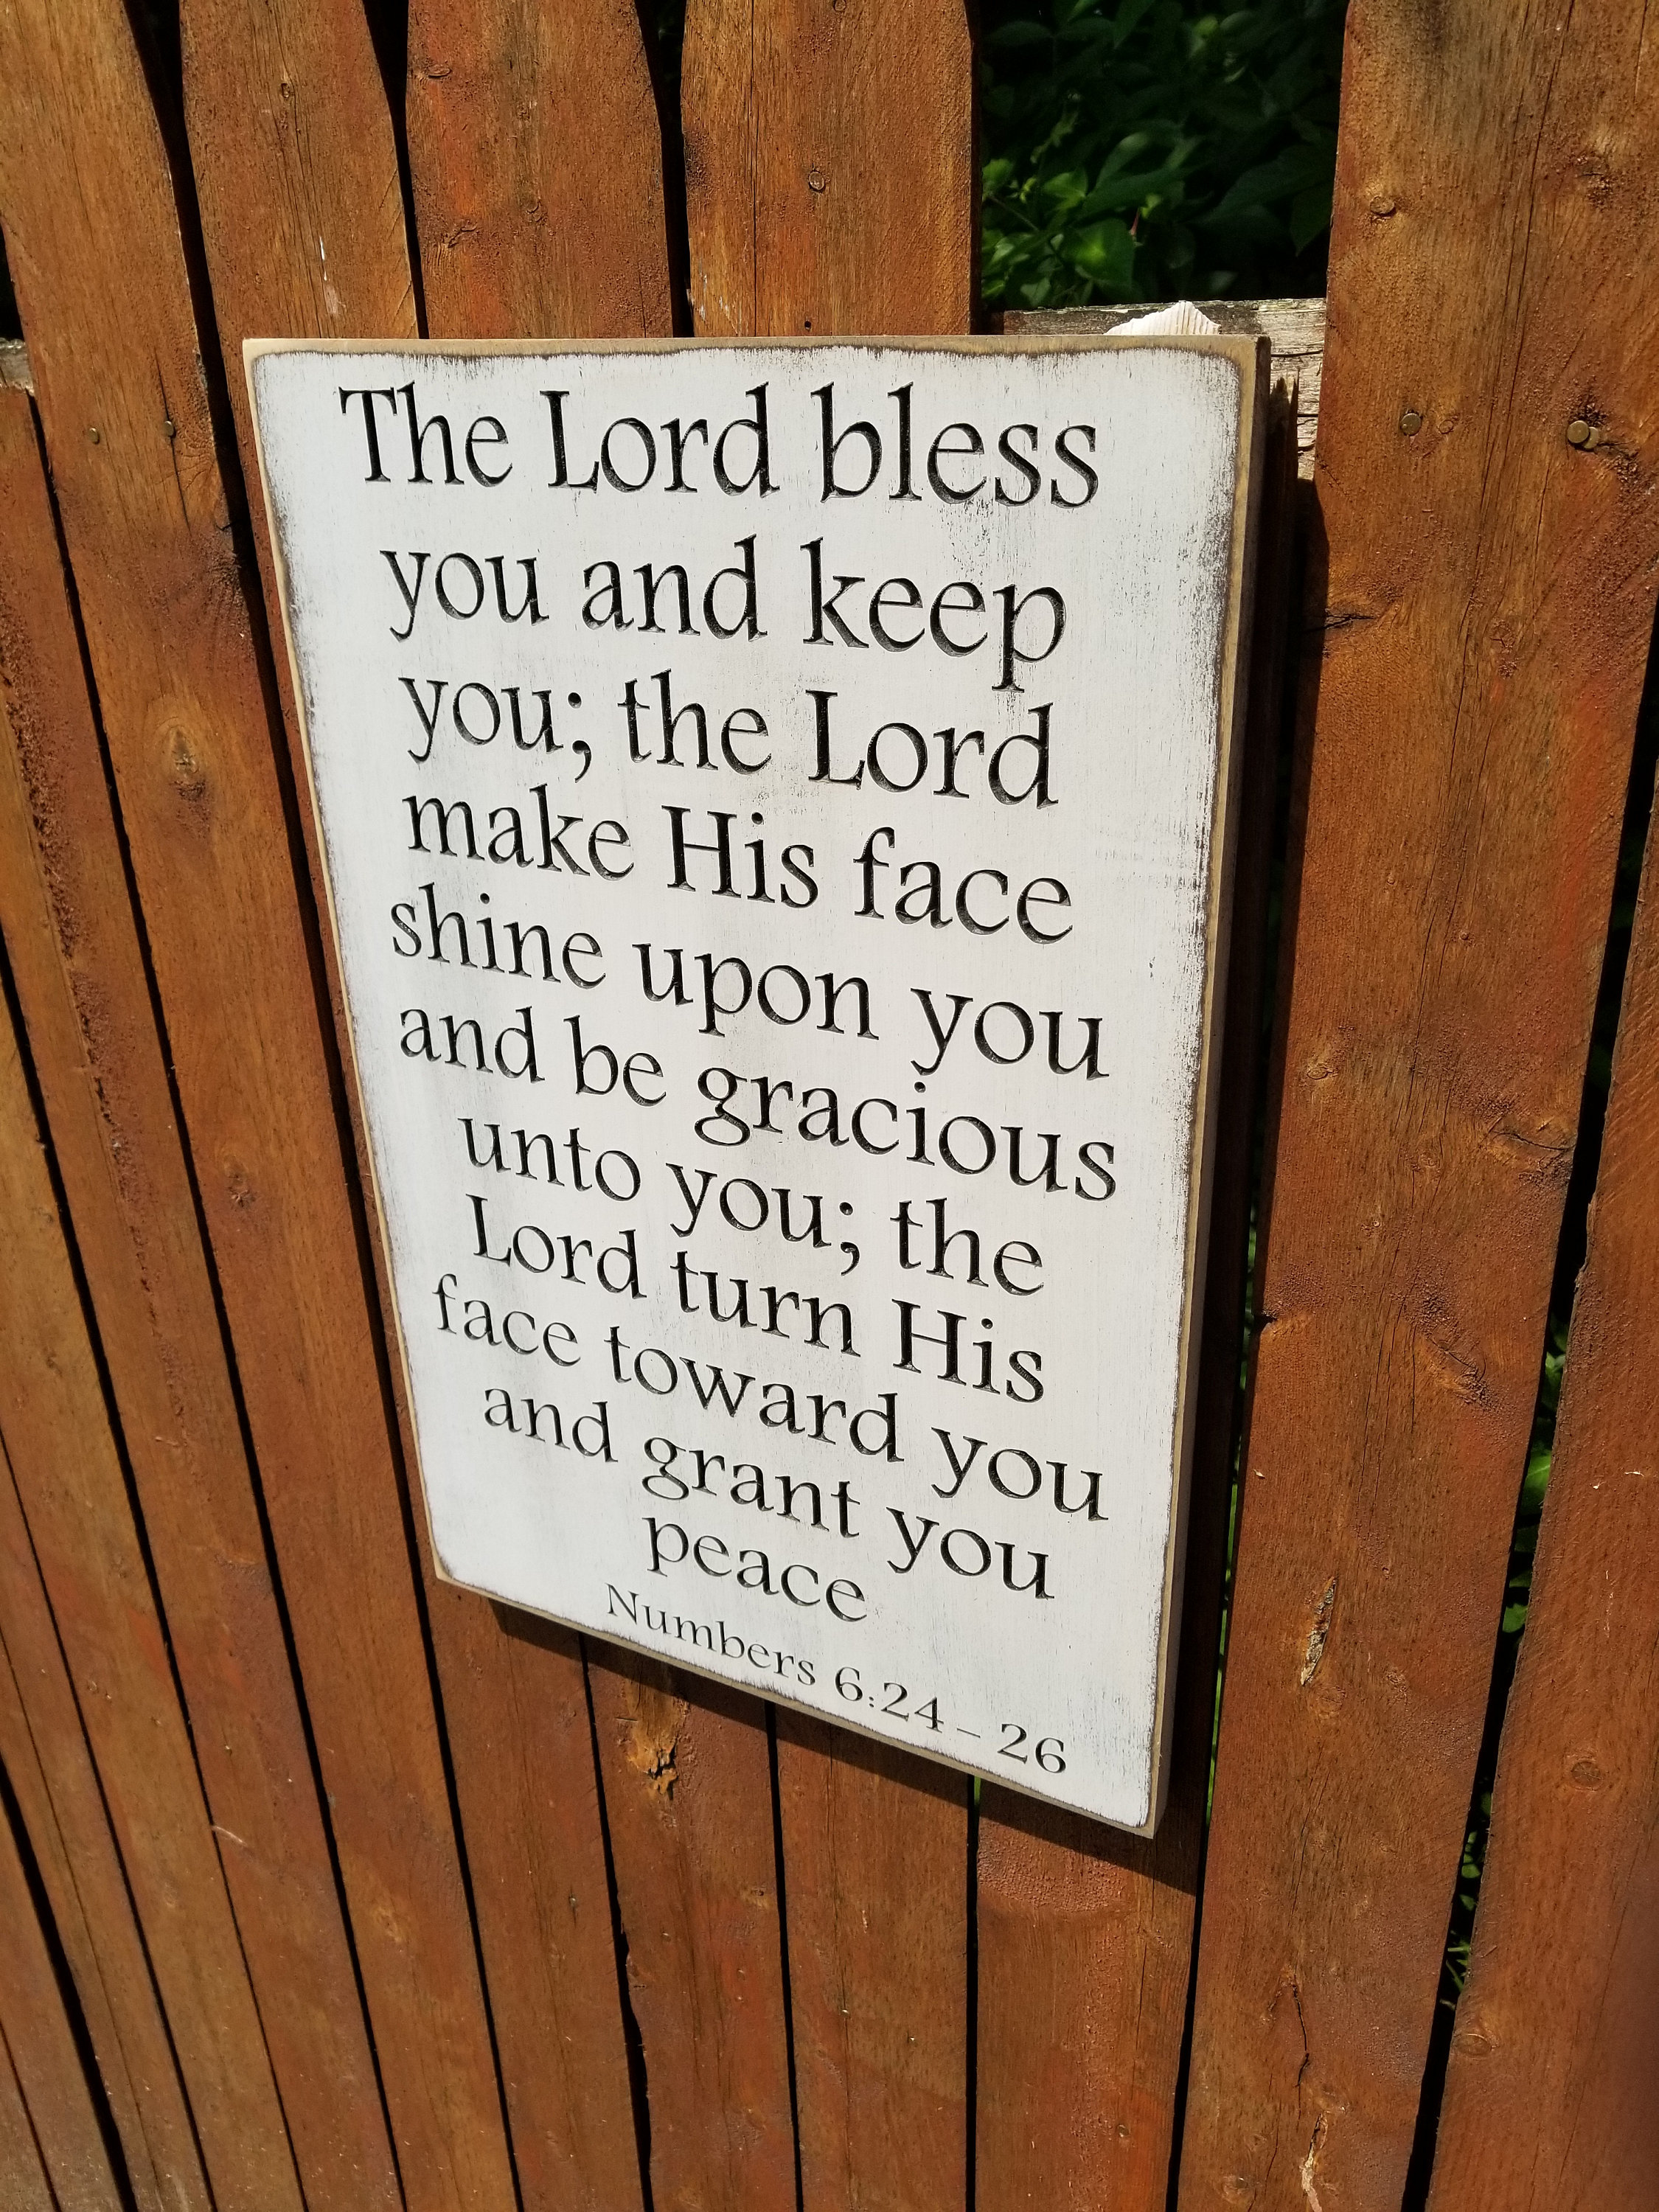 Custom Carved Wooden Sign The Lord Bless And Keep You The Lord Make His Face Shine Upon You And Be Gracious Unto You